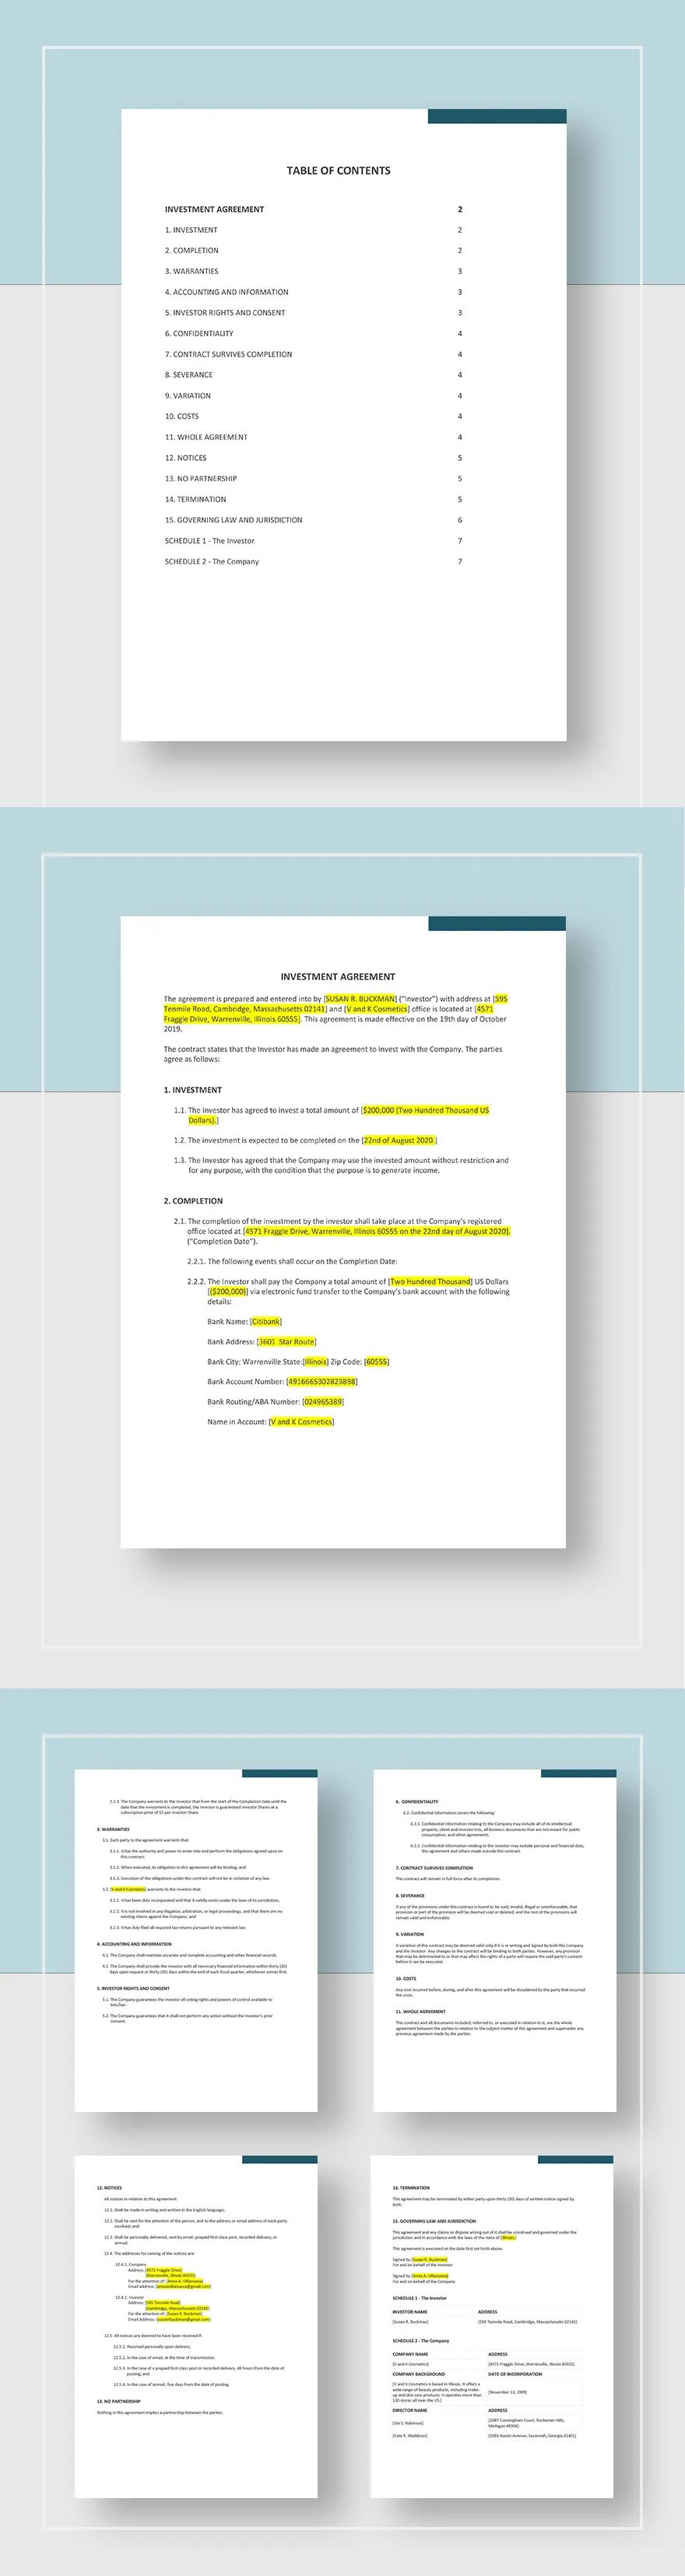 Product Investment Contract Template